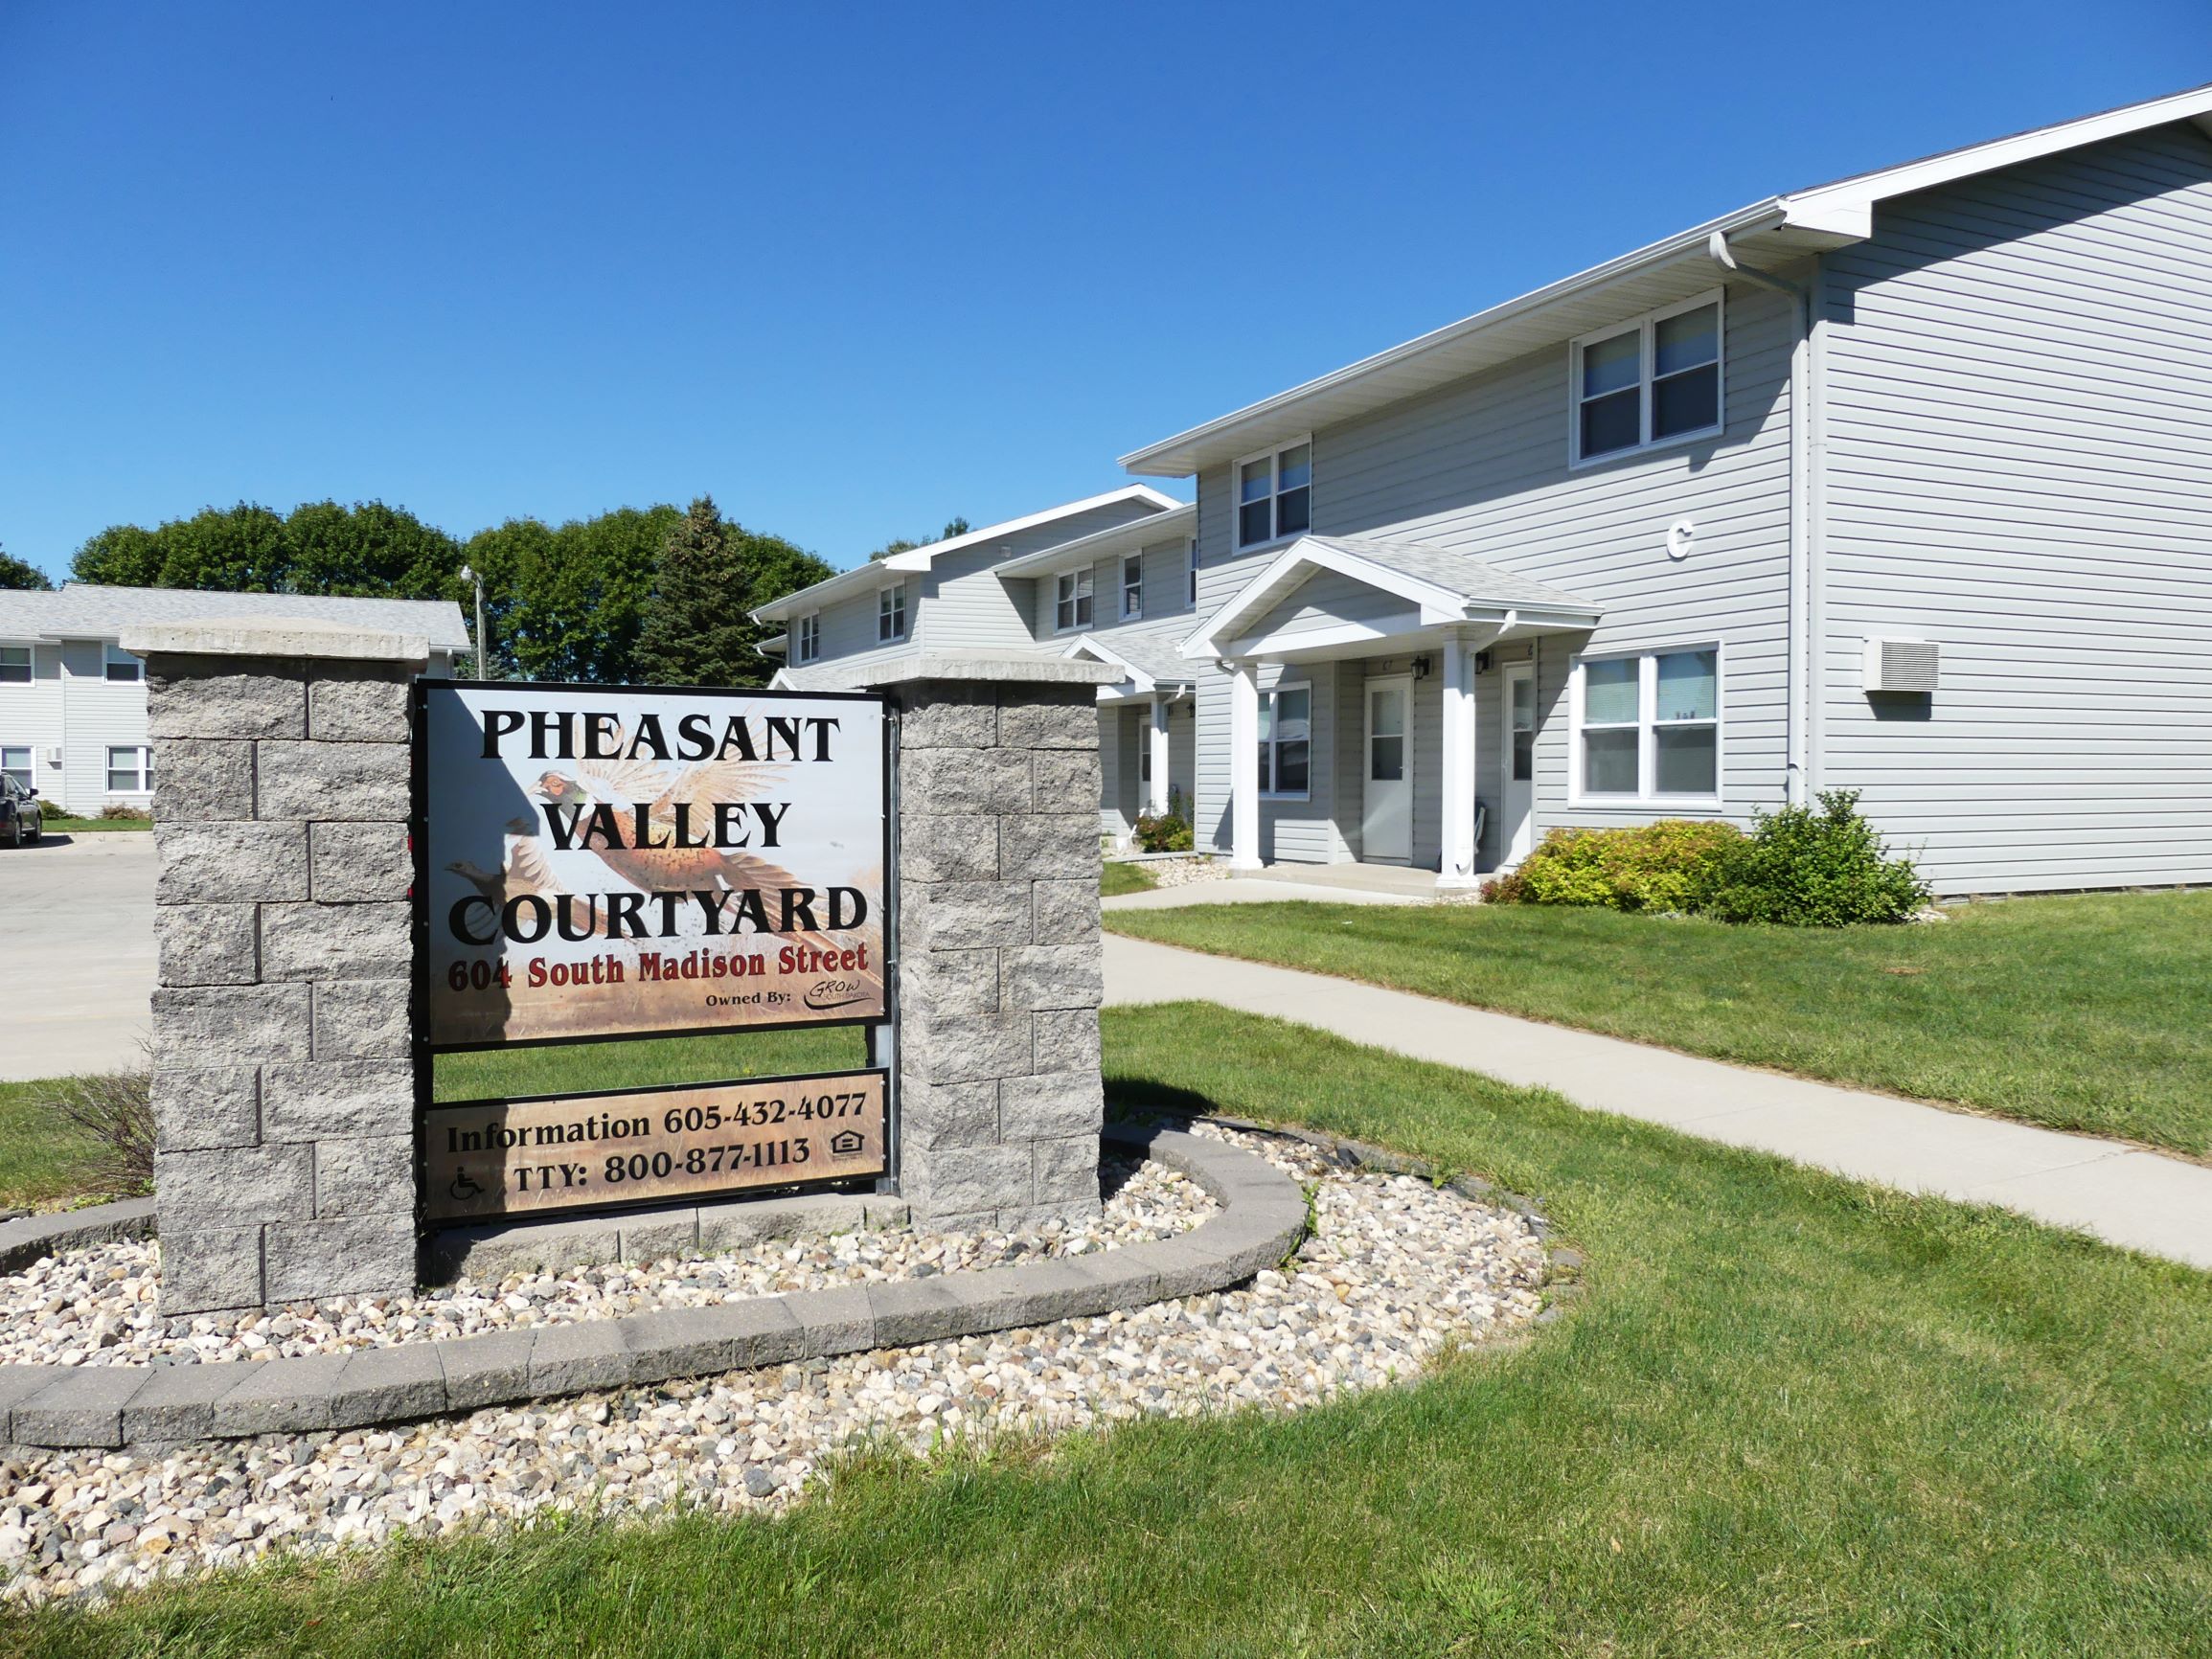 Pheasant Valley Courtyard Townhomes in Milbank SD Mills PropertyMills Property